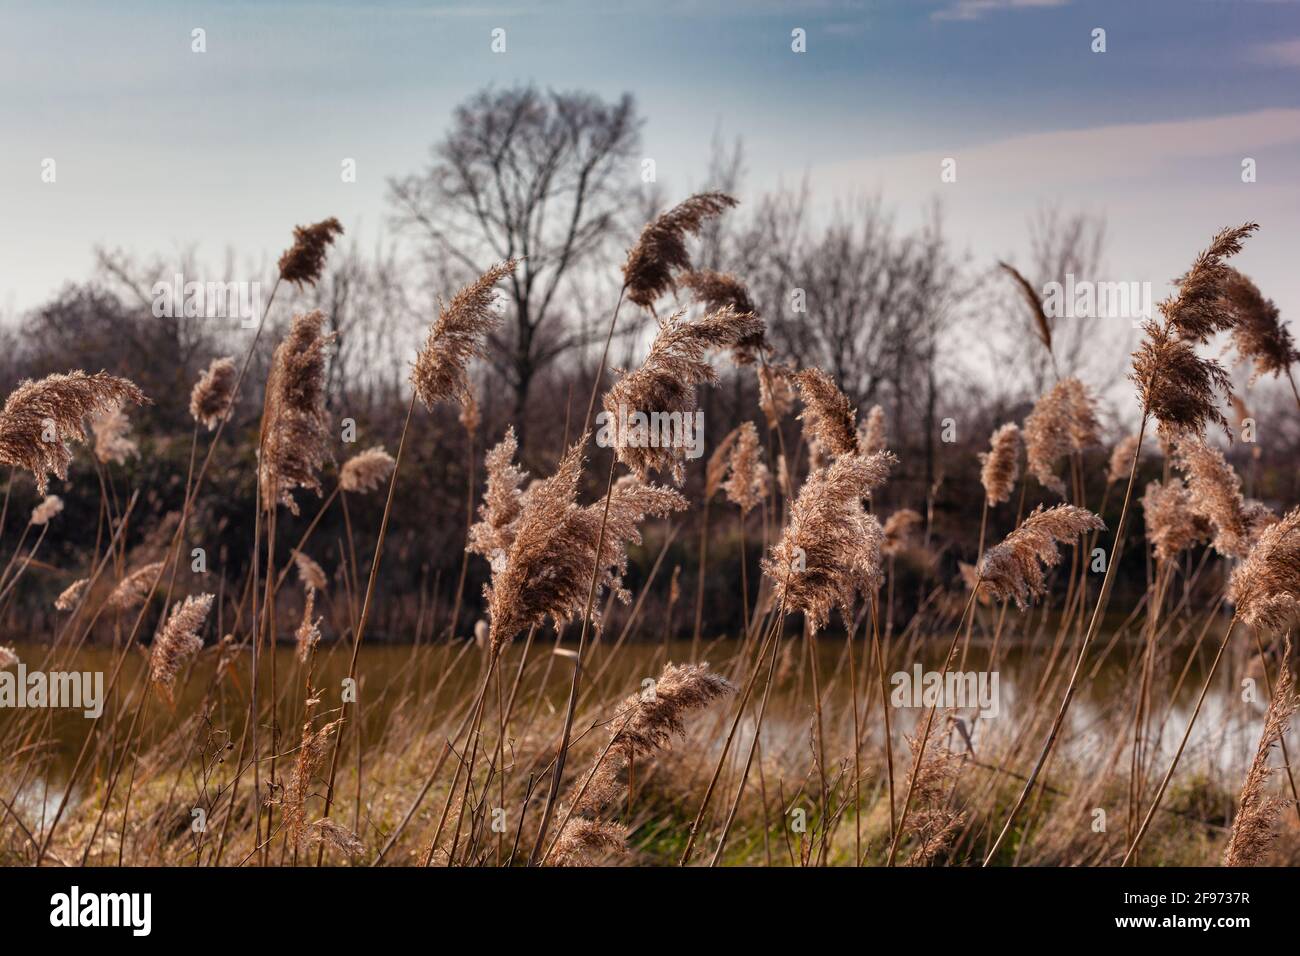 View of the Phragmites australis, known as common reed blowing in the wind Stock Photo